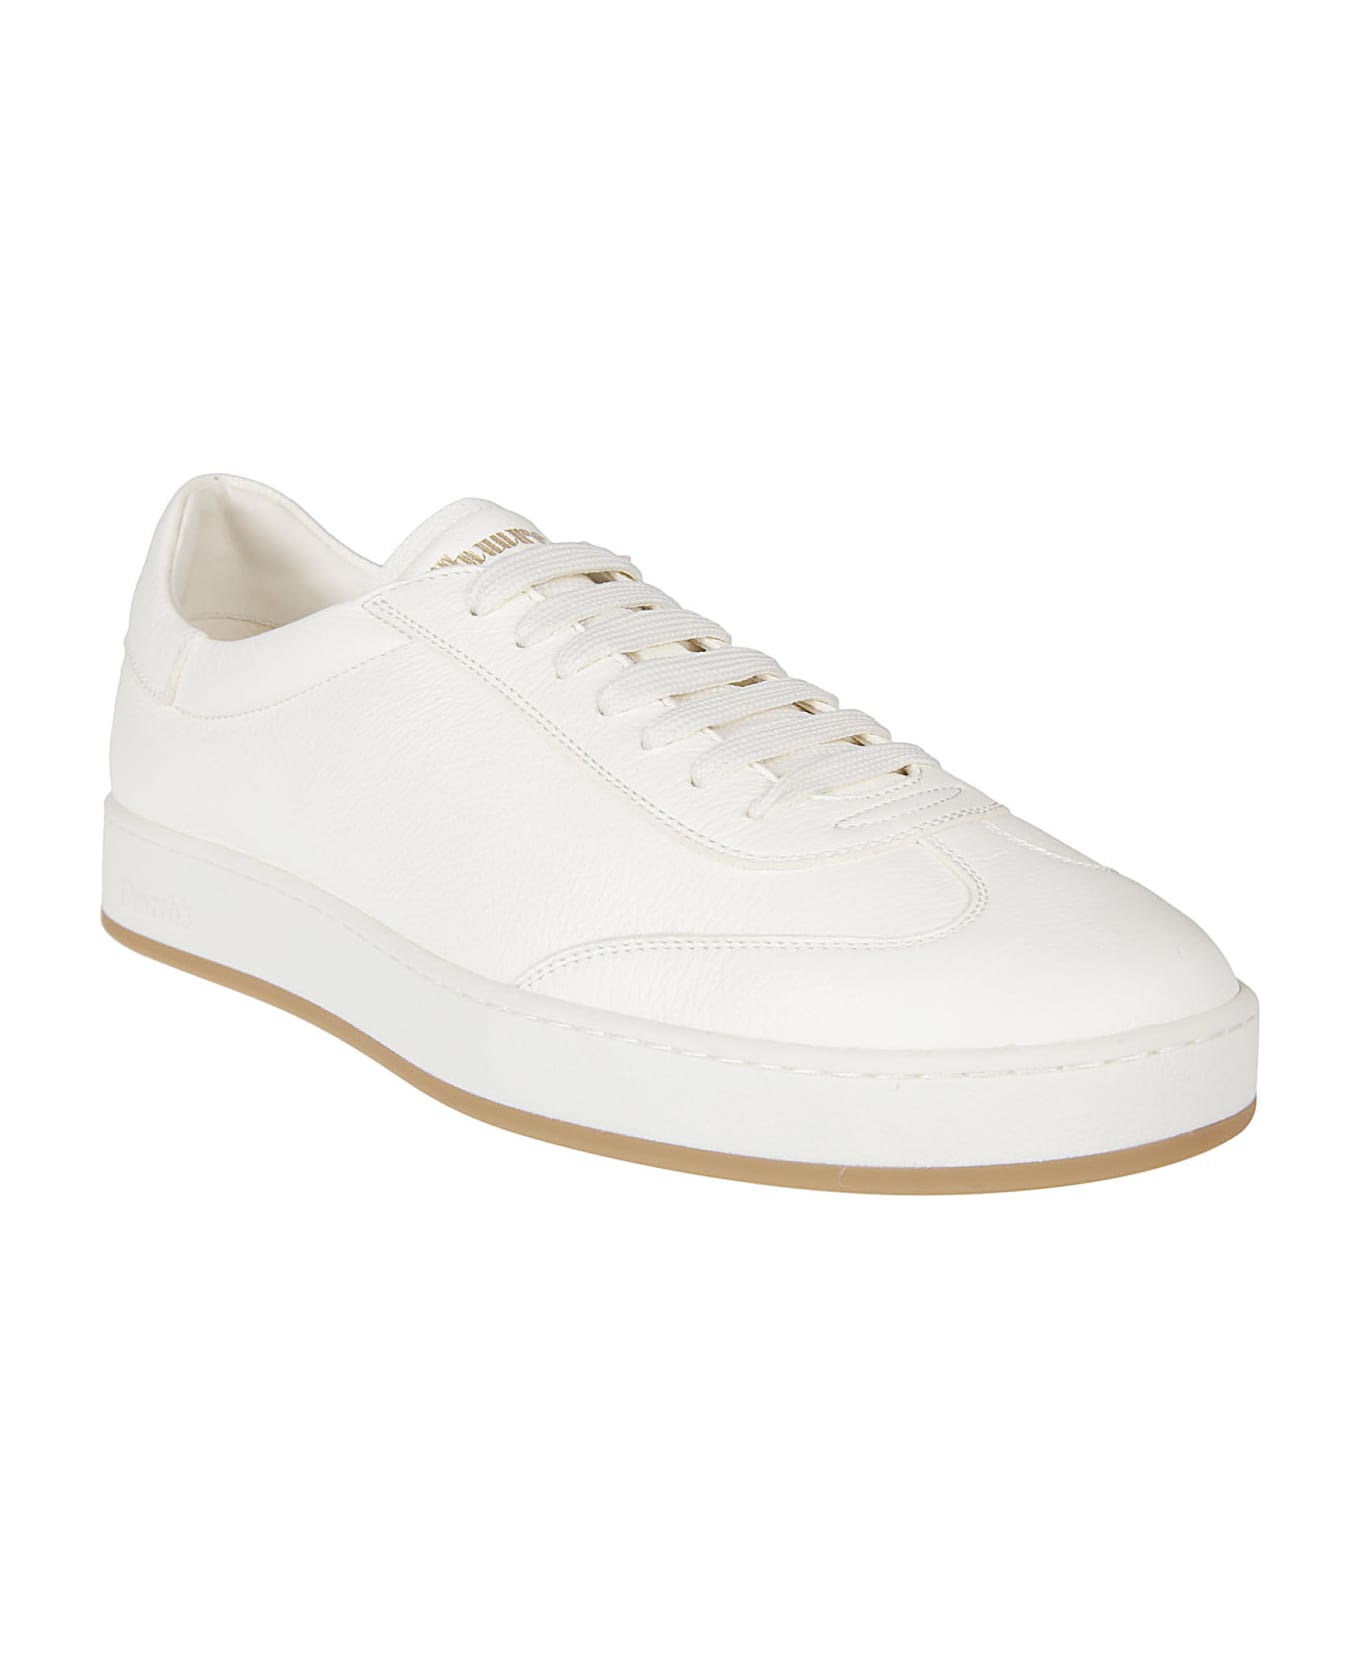 Church's Largs 2 Sneakers - All Ivory